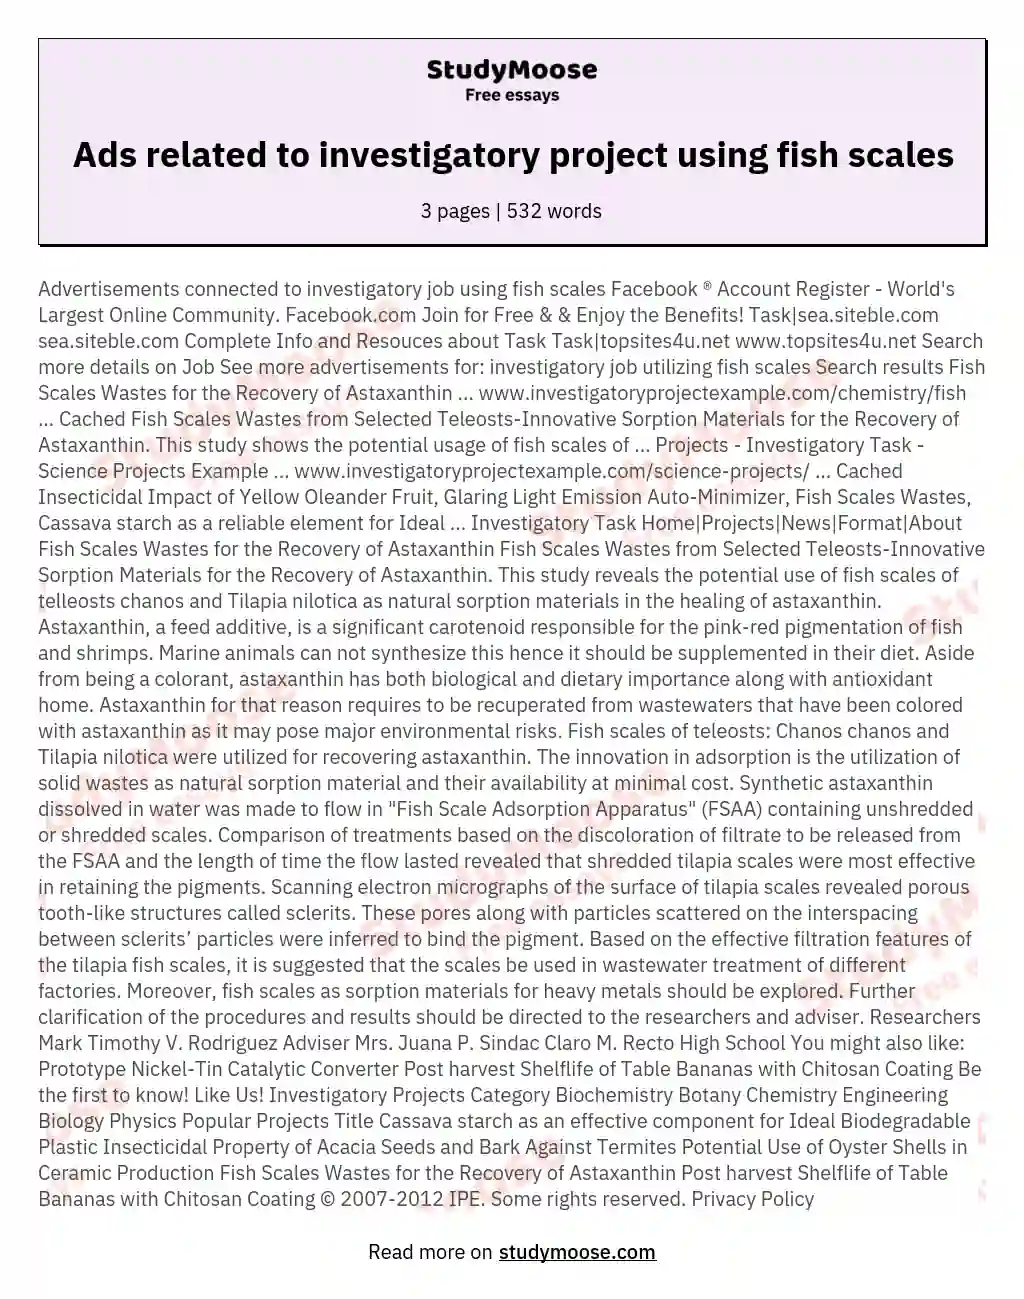 Ads related to investigatory project using fish scales